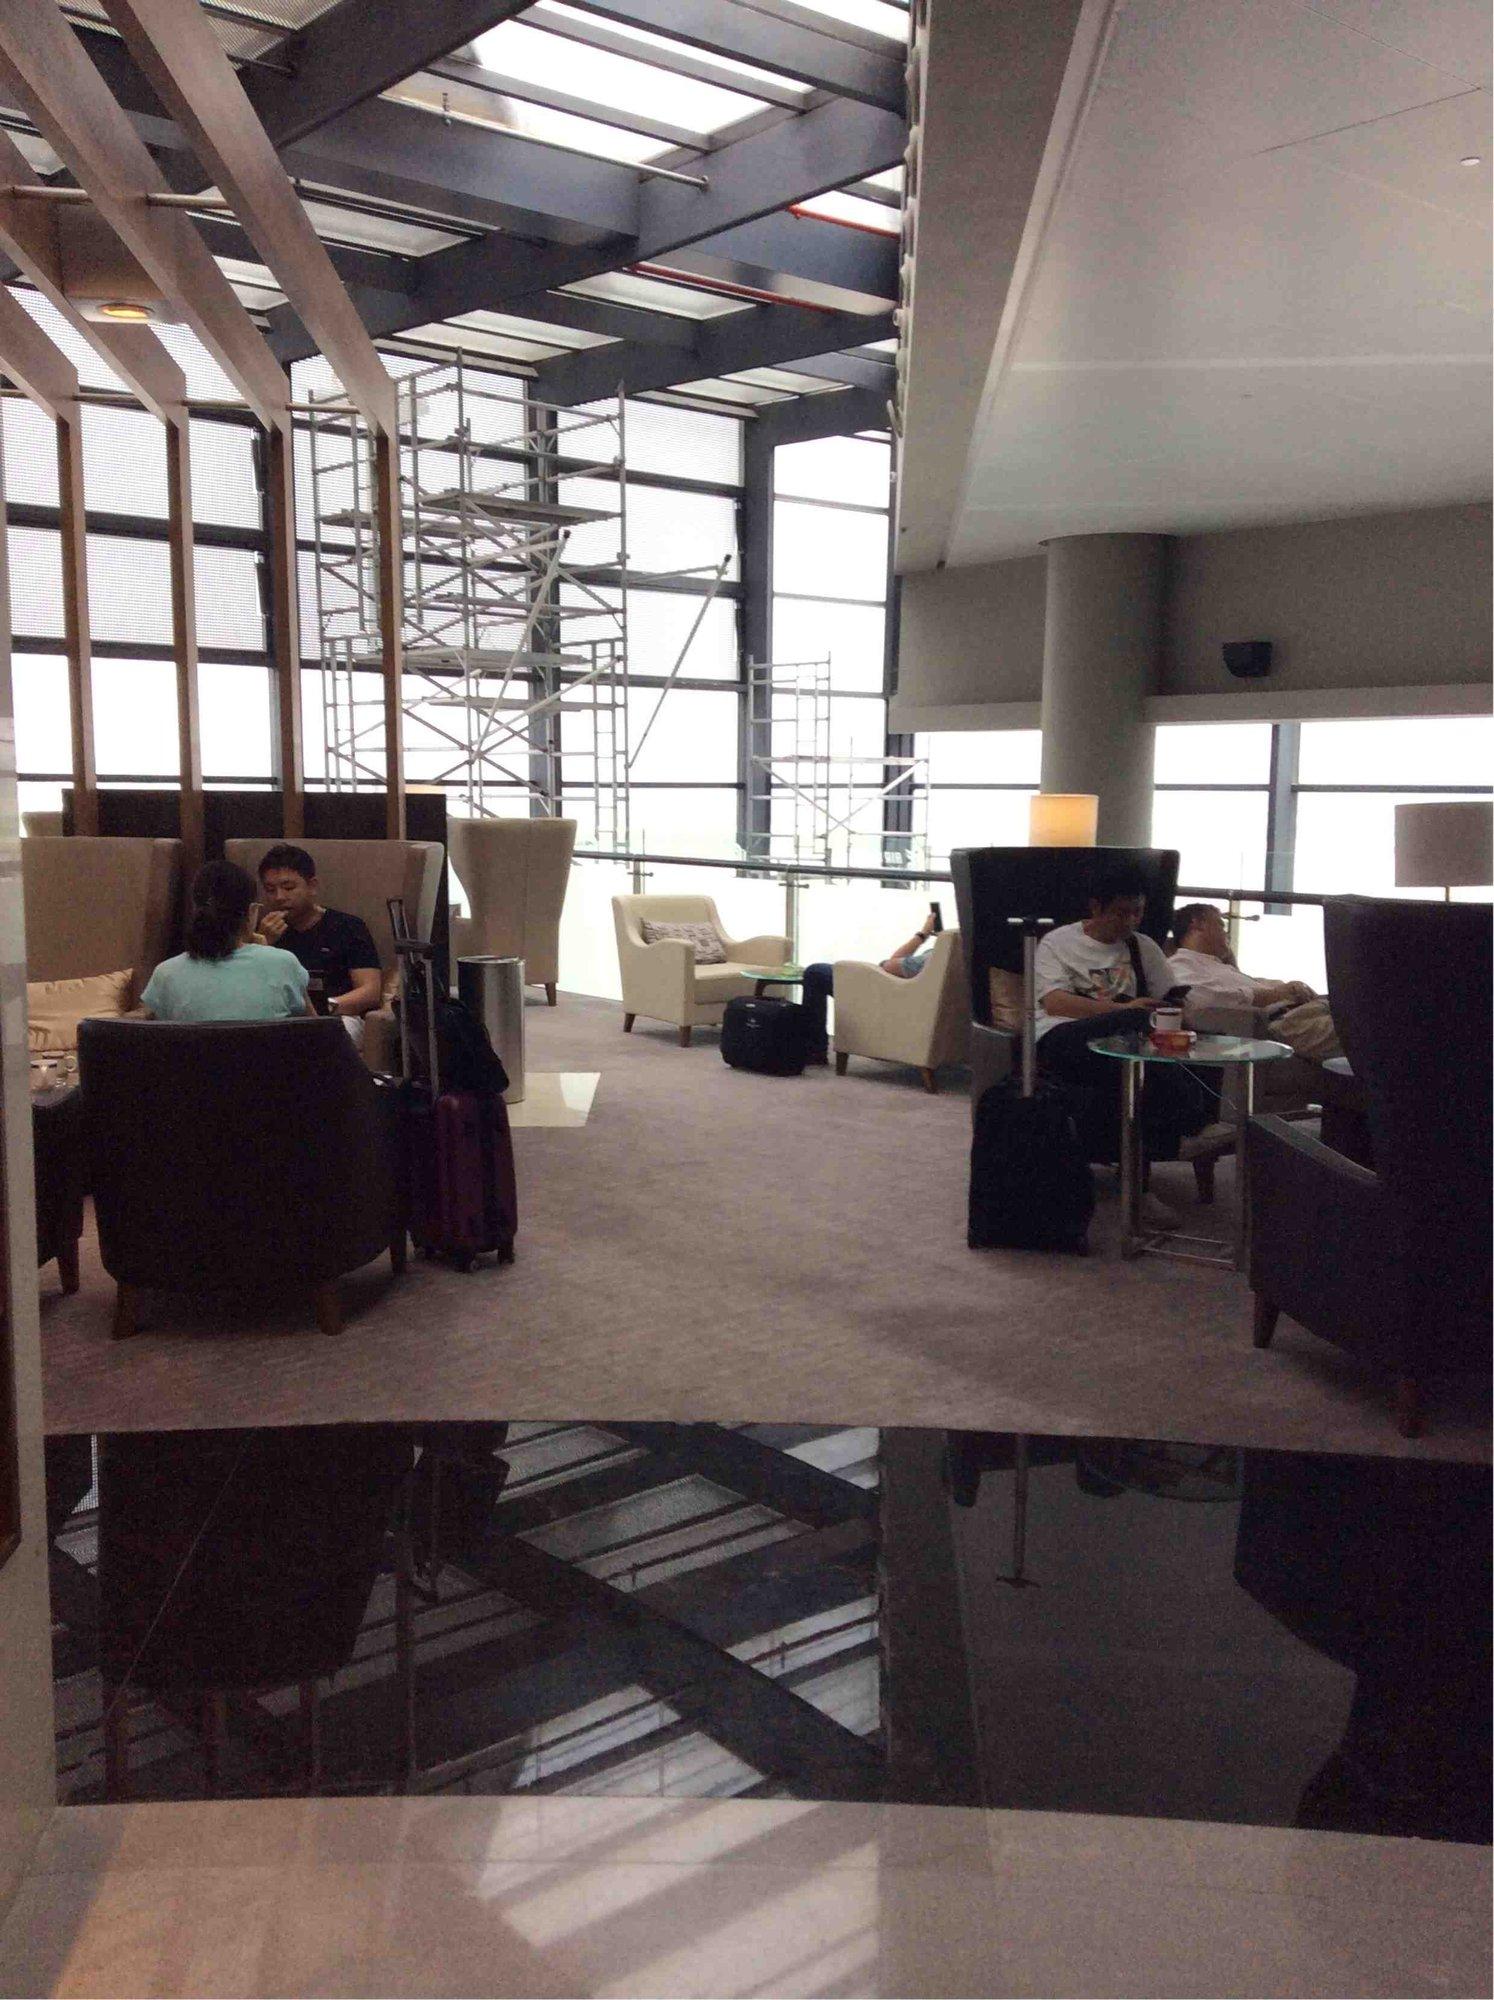 V8 Air China First & Business Class Lounge image 8 of 9